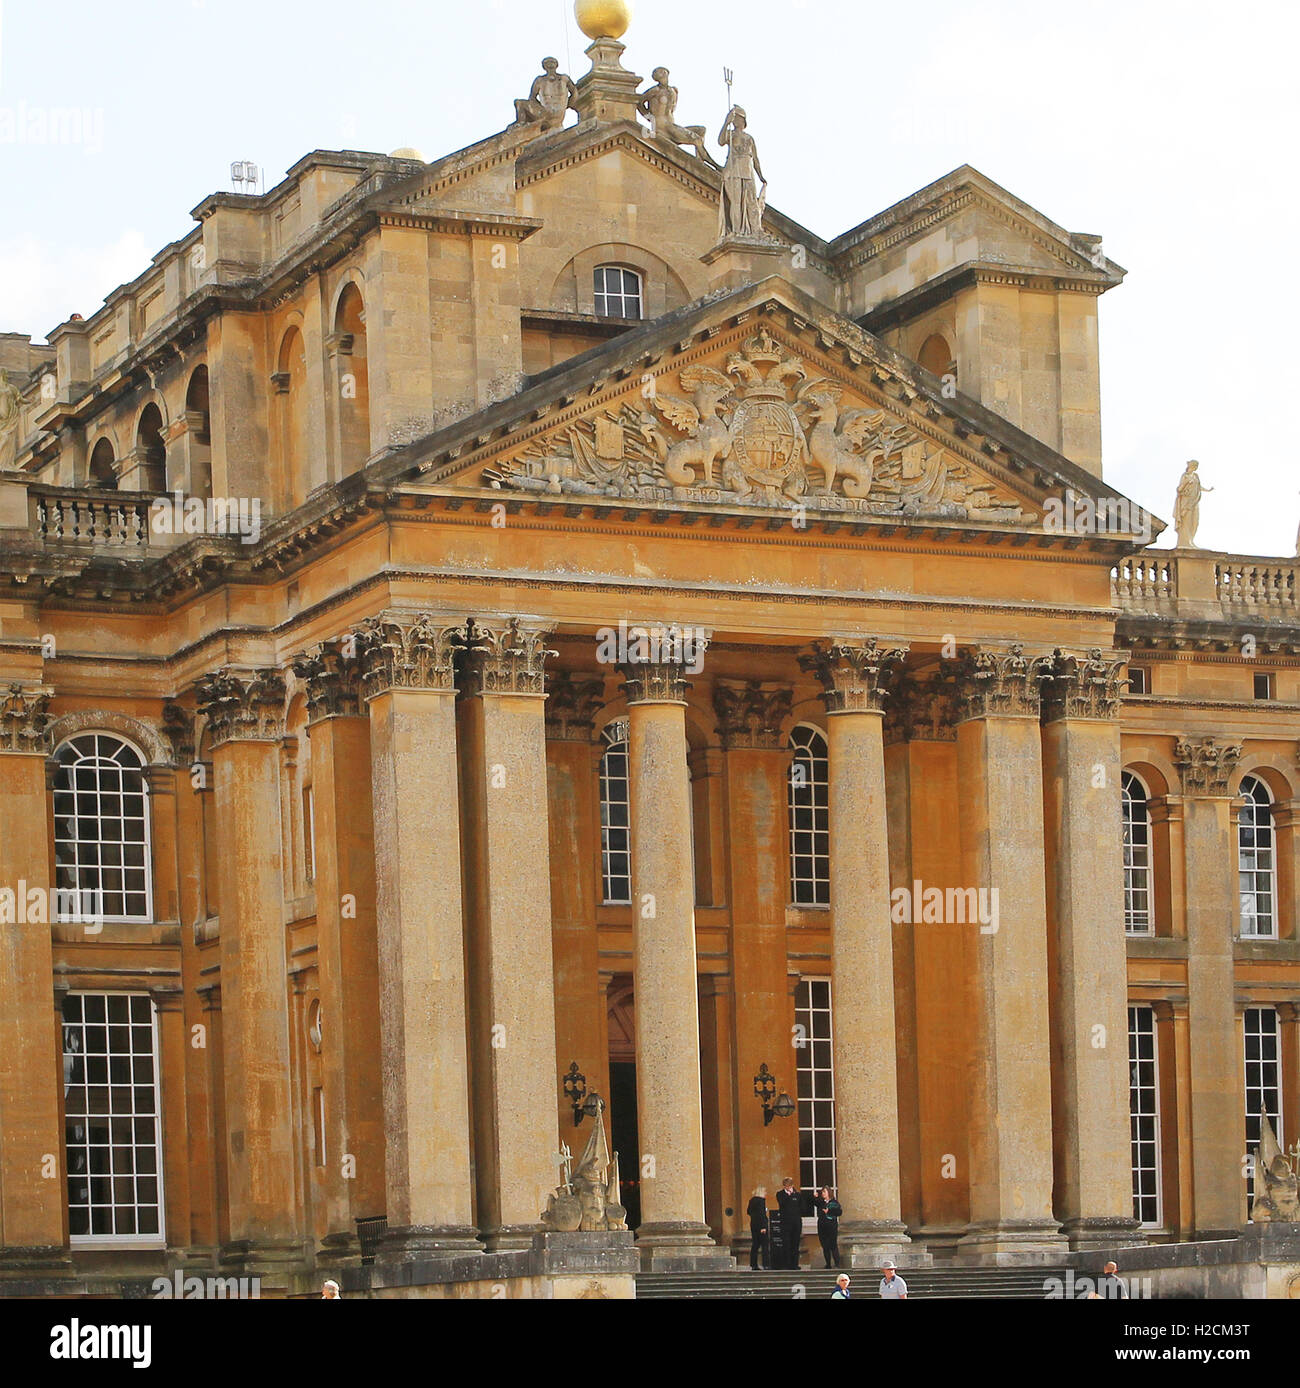 The front entrance of Blenheim Palace Stock Photo